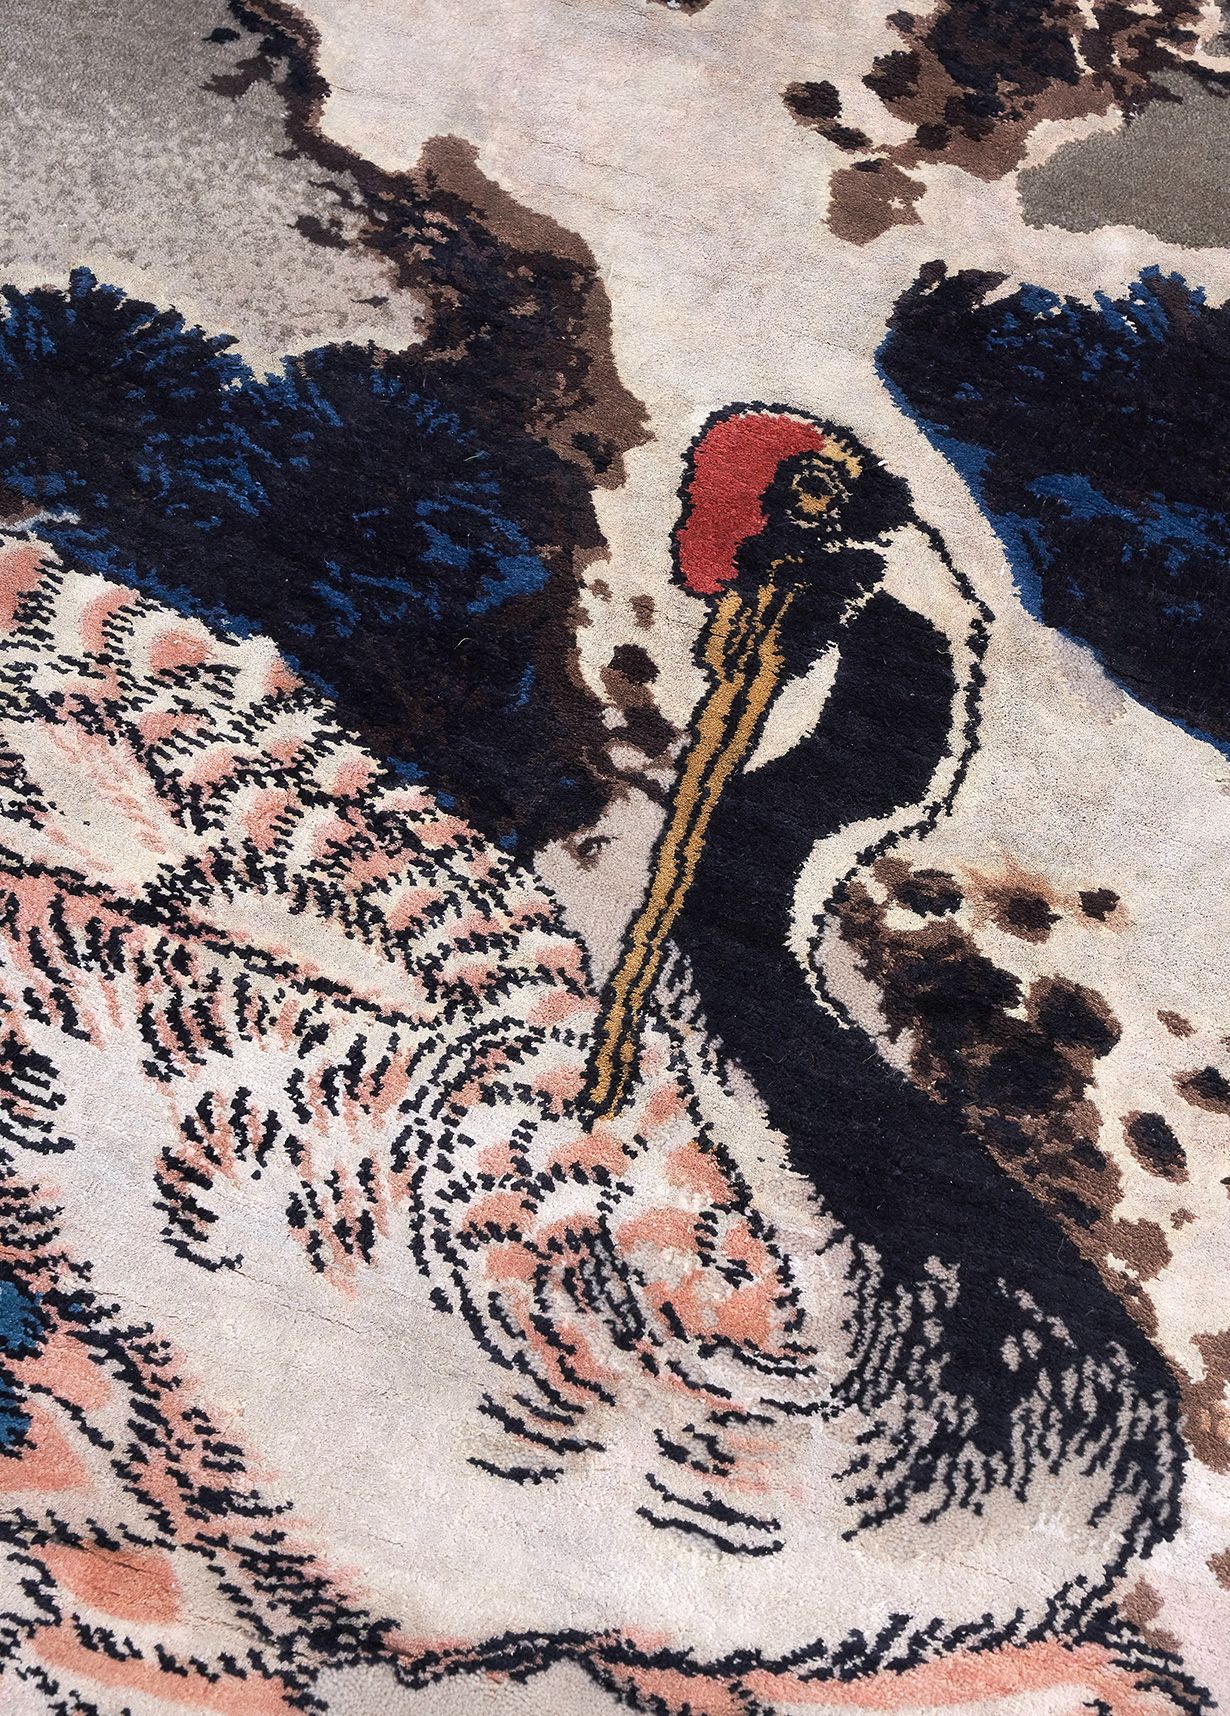 Cranes on a Snowy Pine from the British Museum Collection